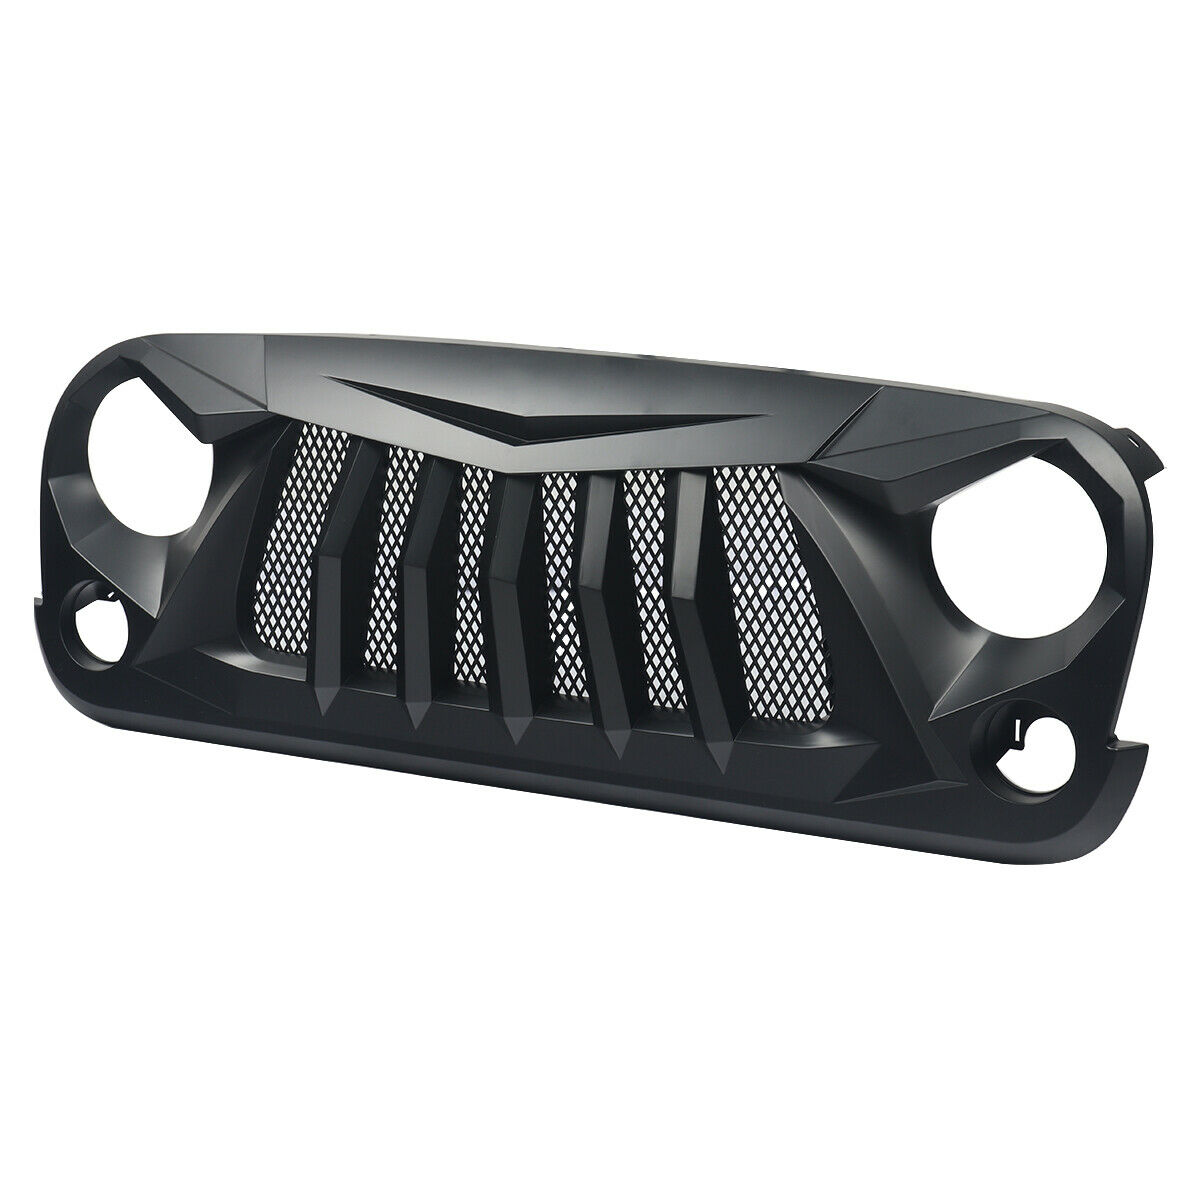 2014 Jeep Wrangler Front Grille 2011 2012 2013 2015 2016